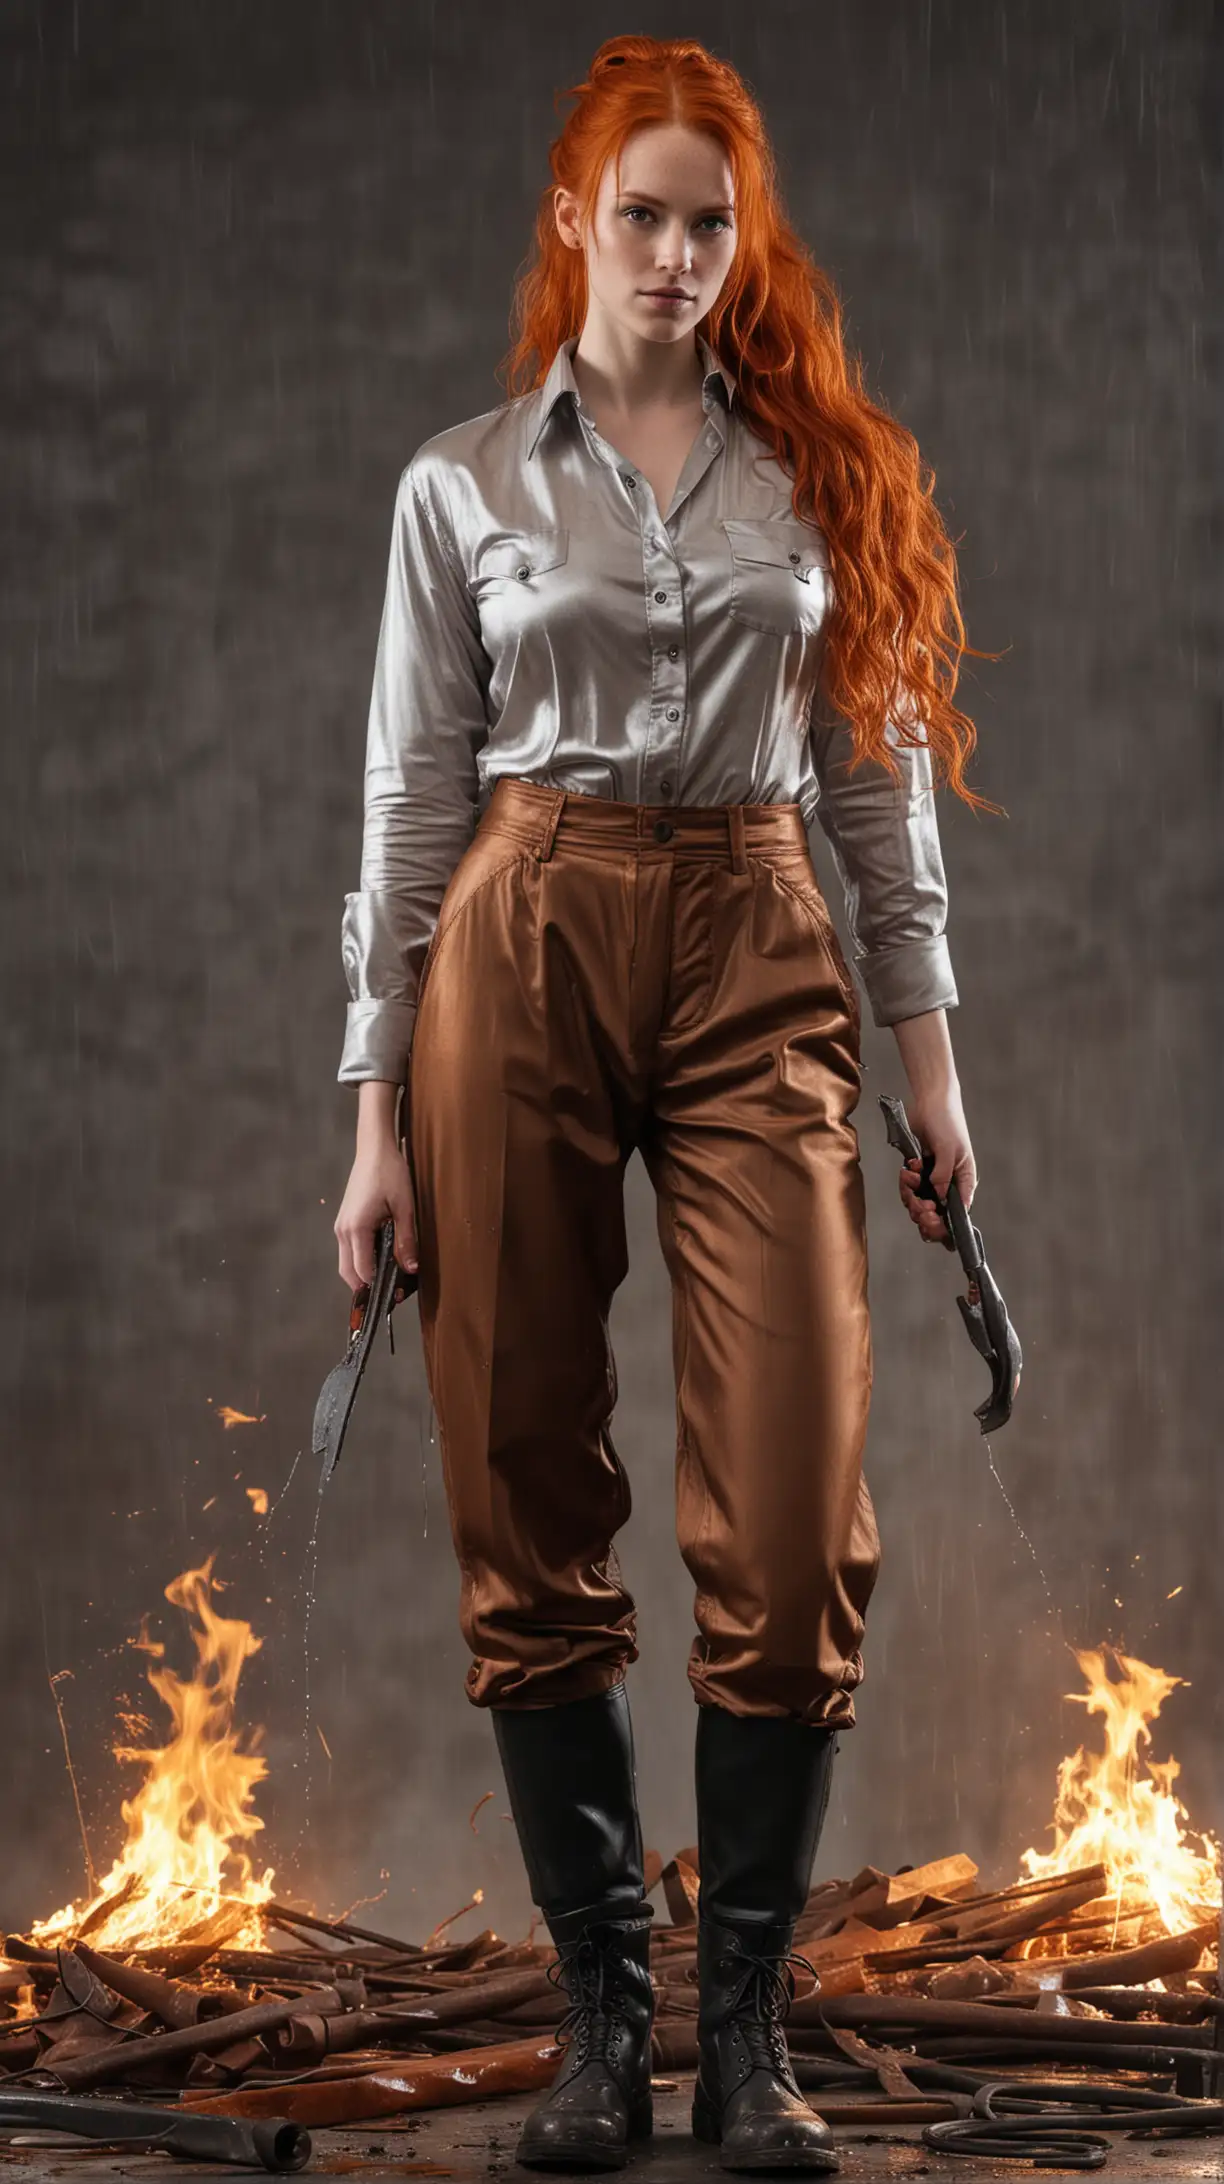 tools of trade worker carcass style Curlly ginger very long ponytail hair model full body pose wear satin button transparent  platinium metal rust shirt  in fire rain fully clothed  tools of trade carcass style